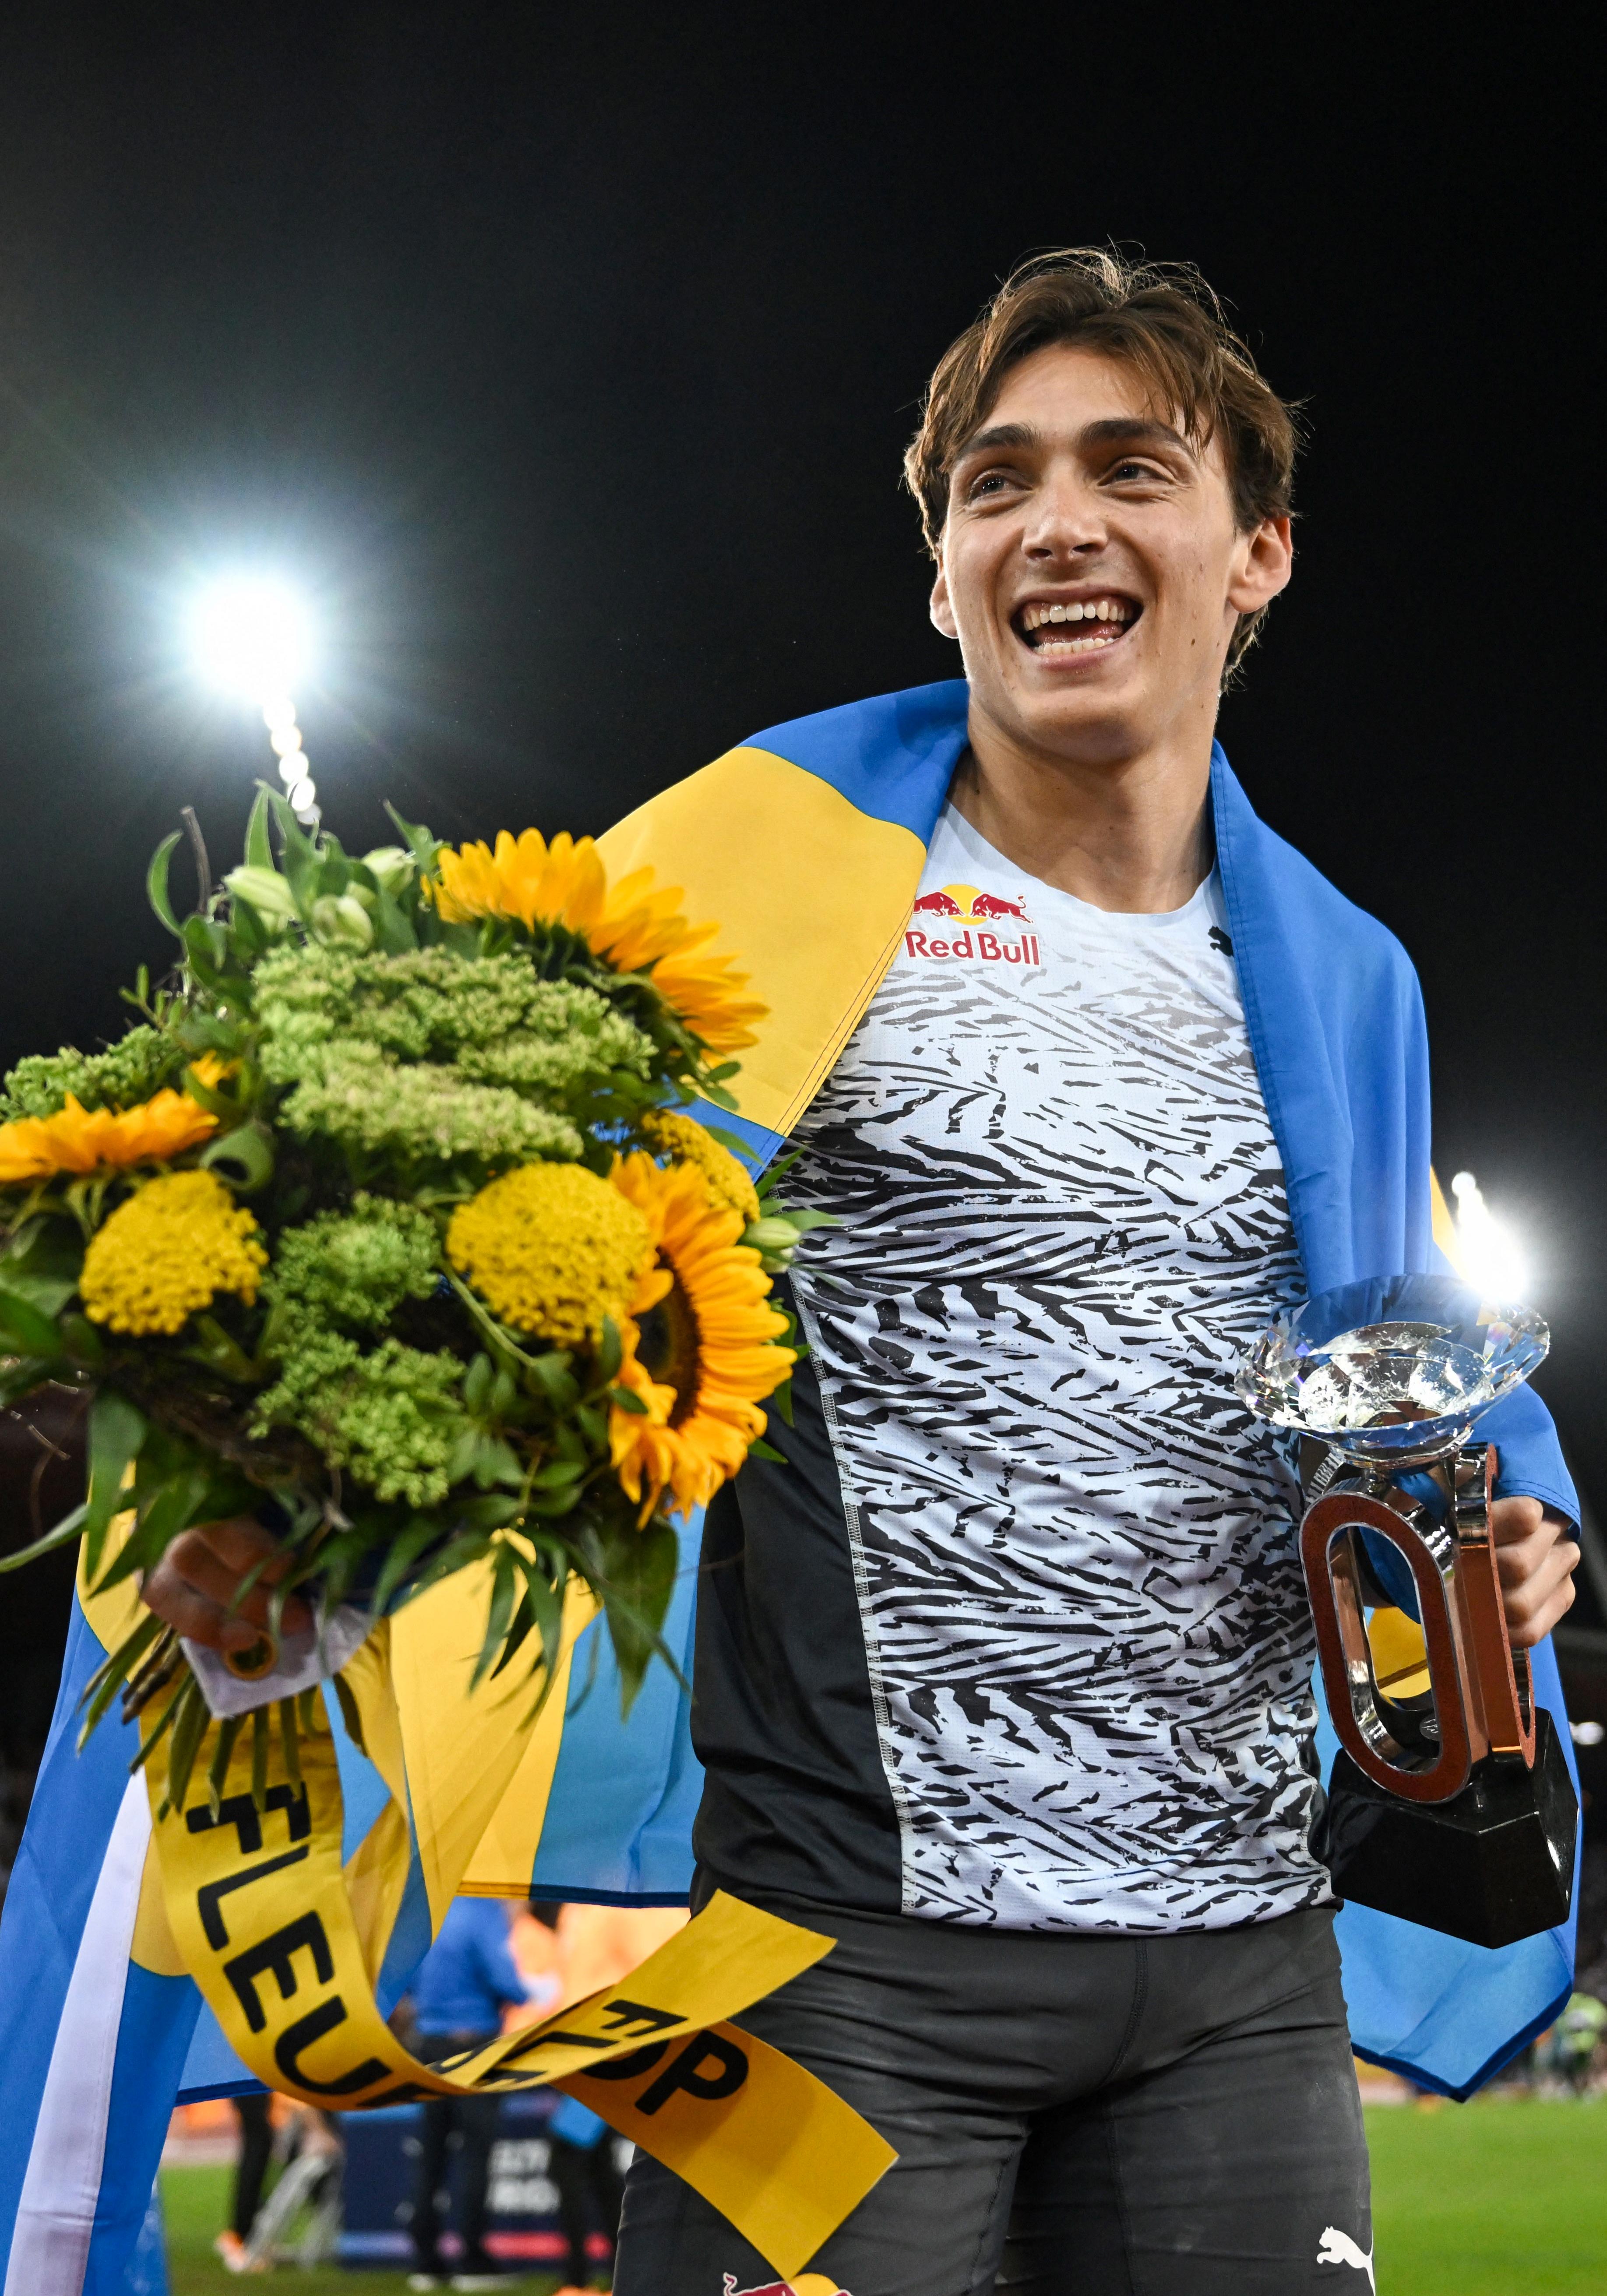 Omega Was On Track to time Weltklasse - The Spectacular finale of The Wanda Diamond League 